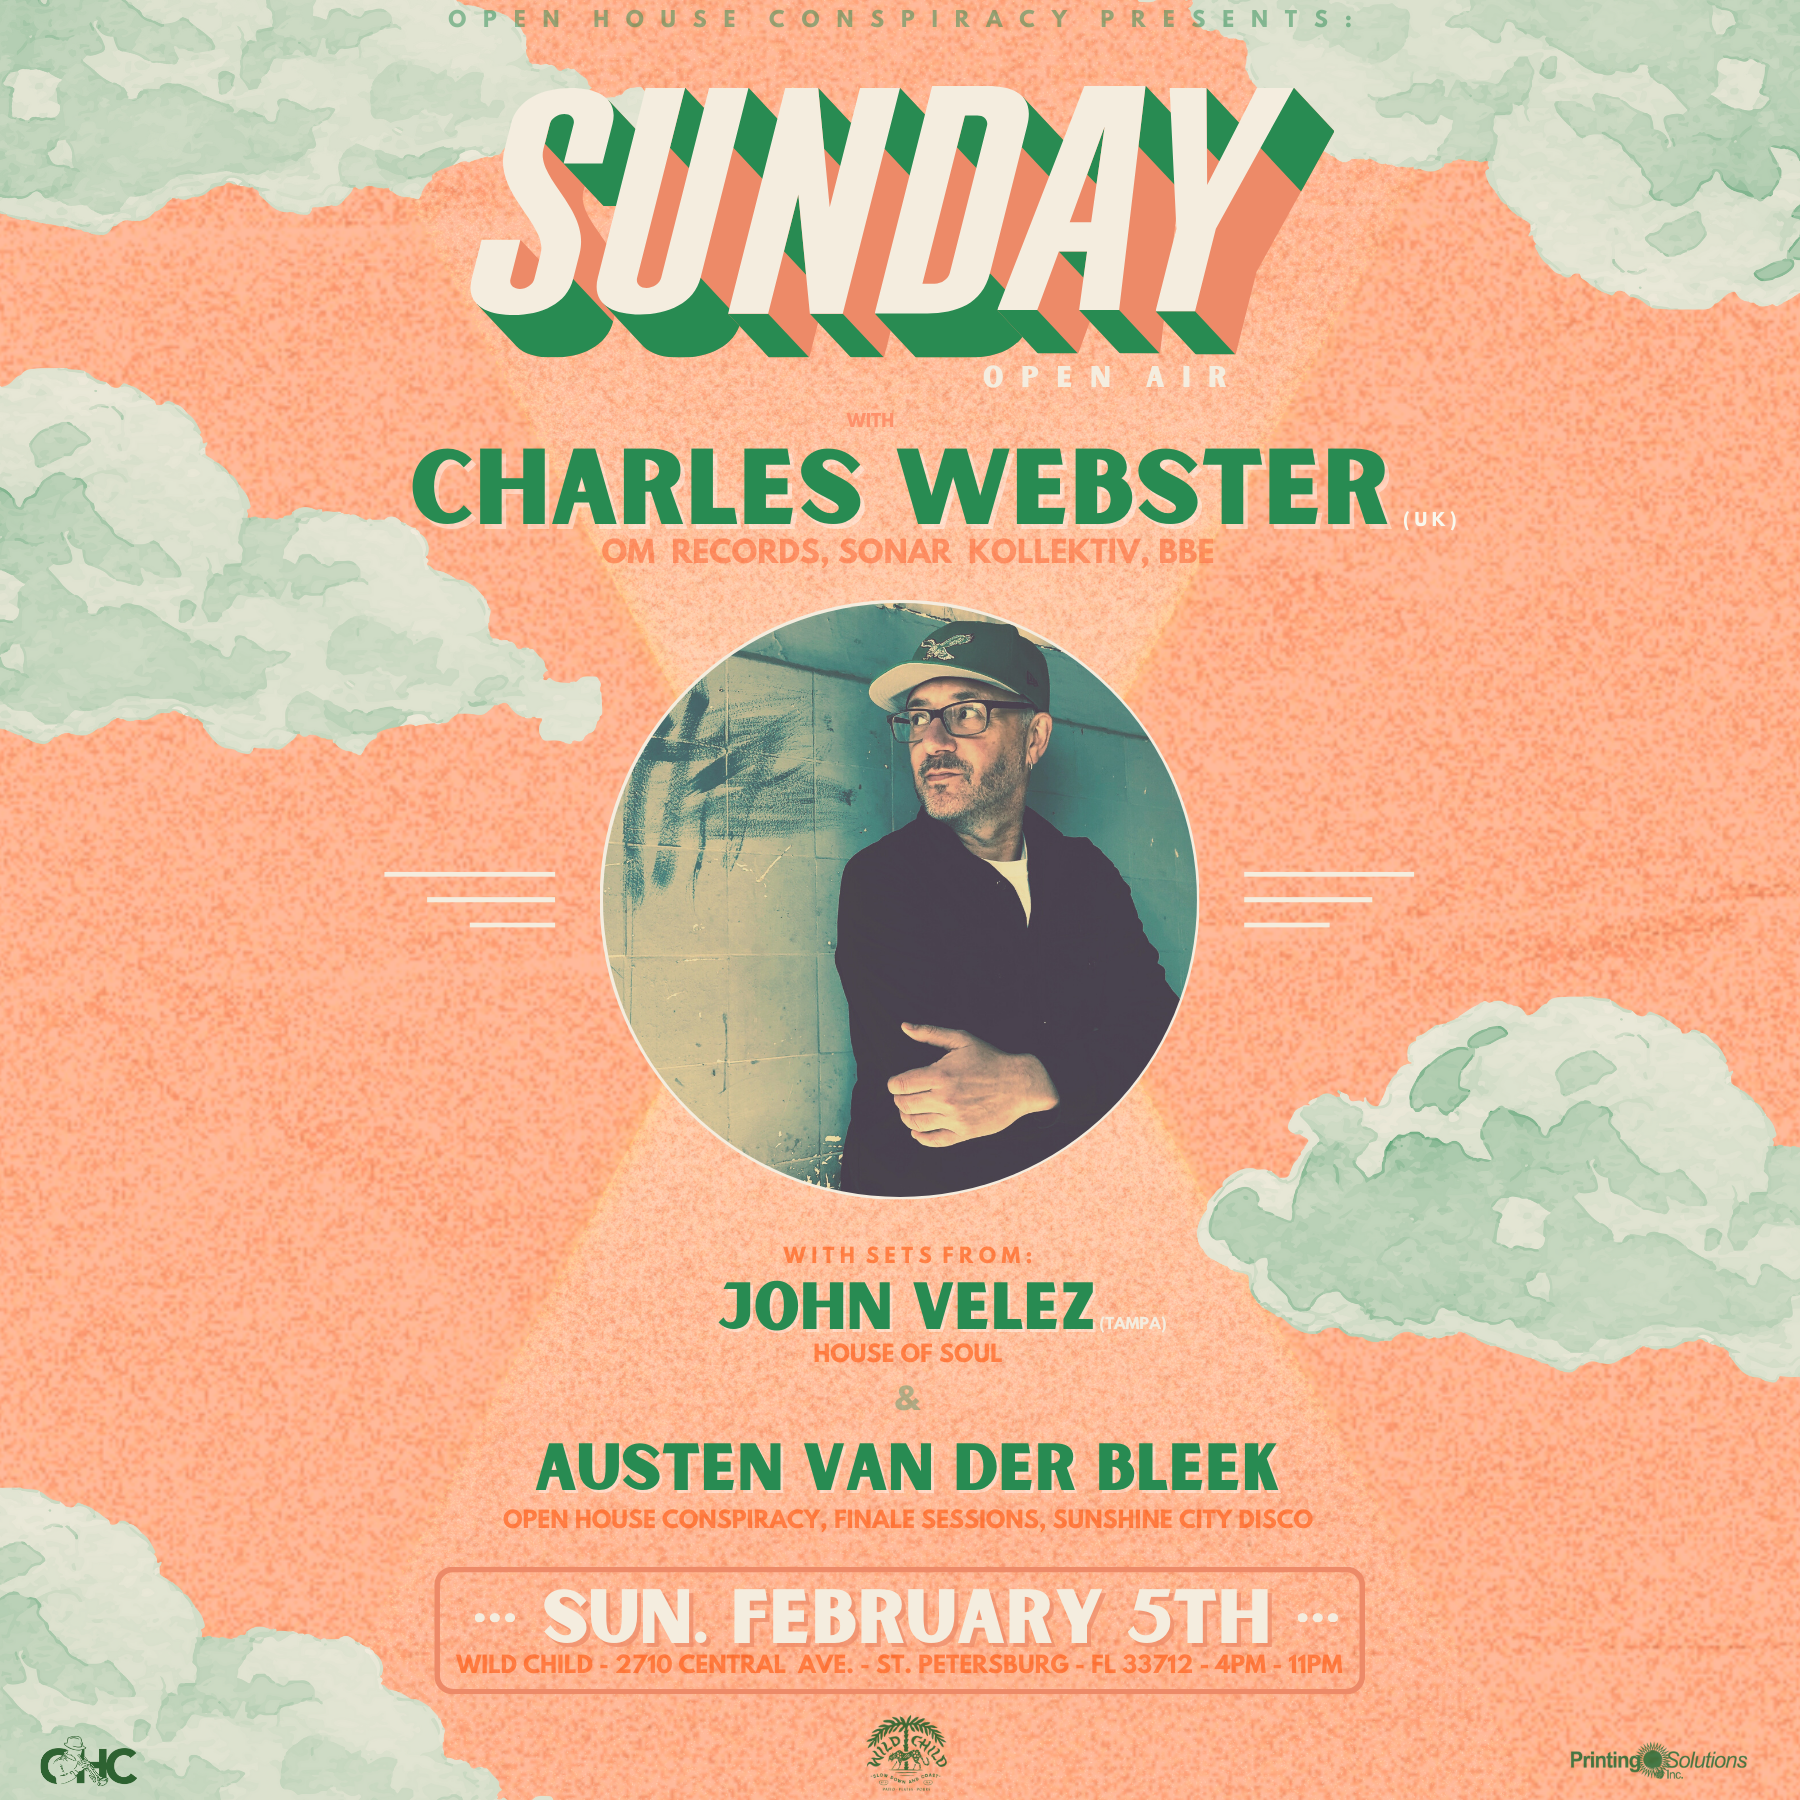 Sunday Open Air with Charles Webster (UK) - フライヤー表